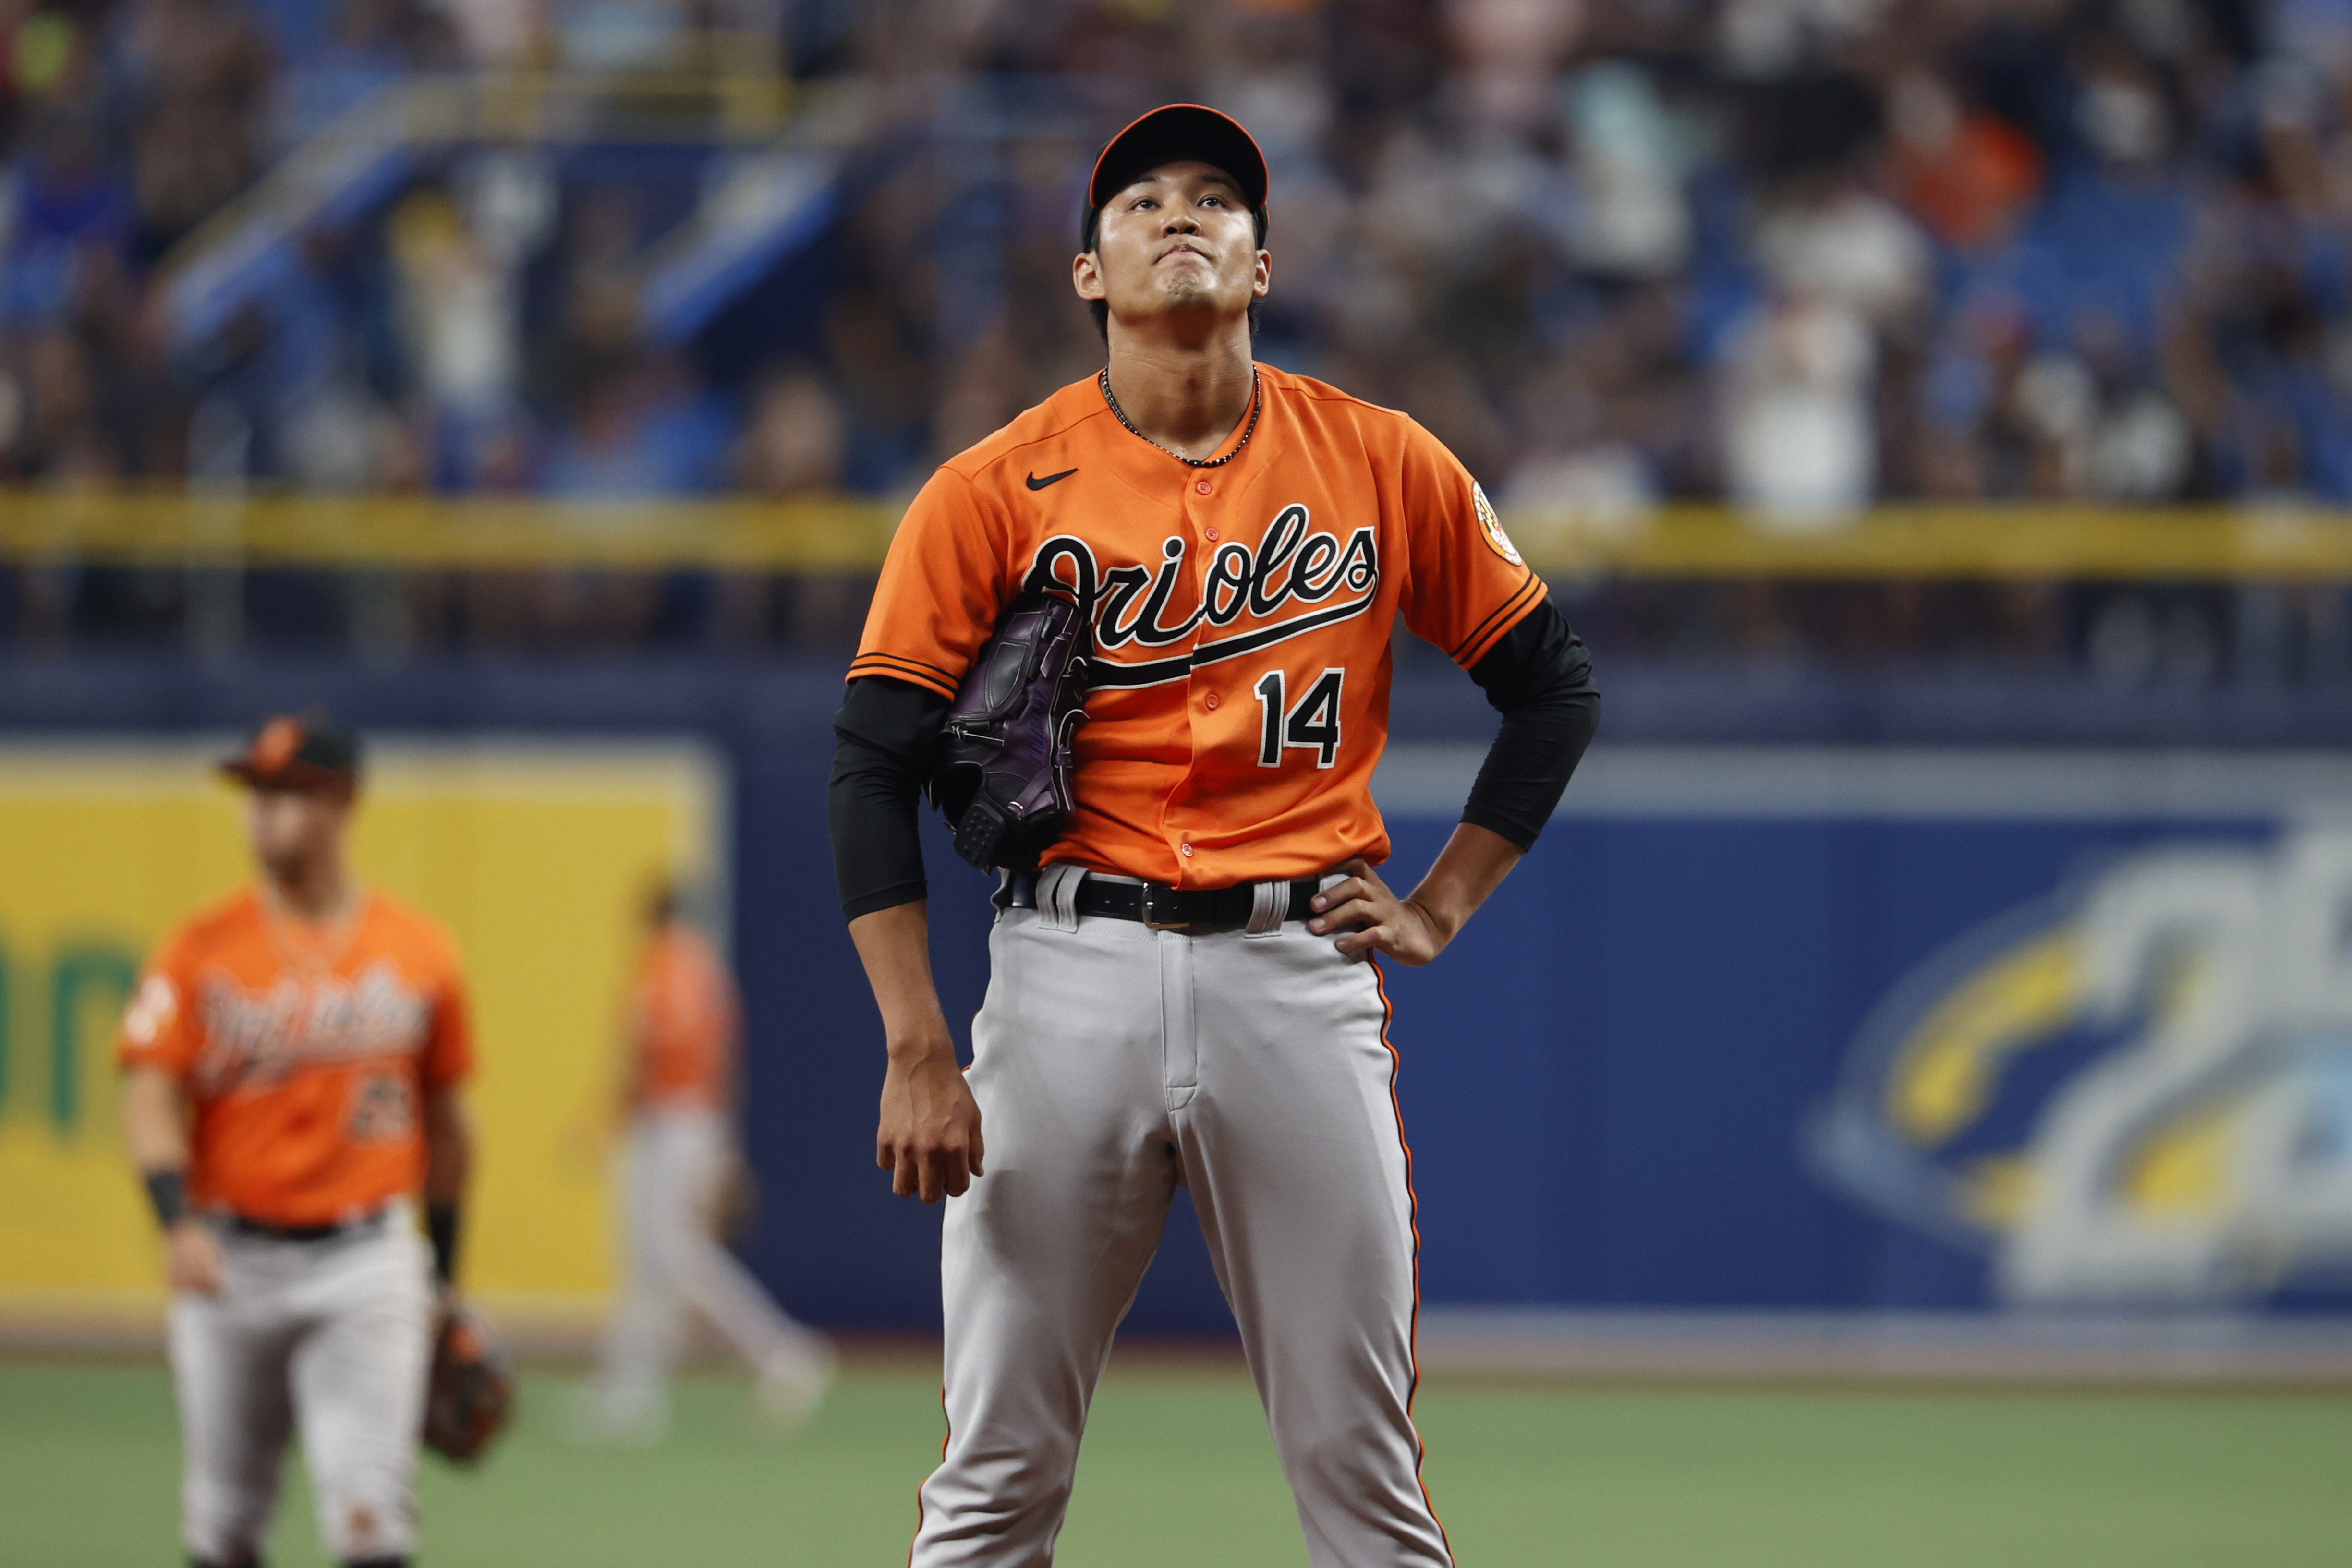 Pregame notes on Fujinami, important series and more - Blog